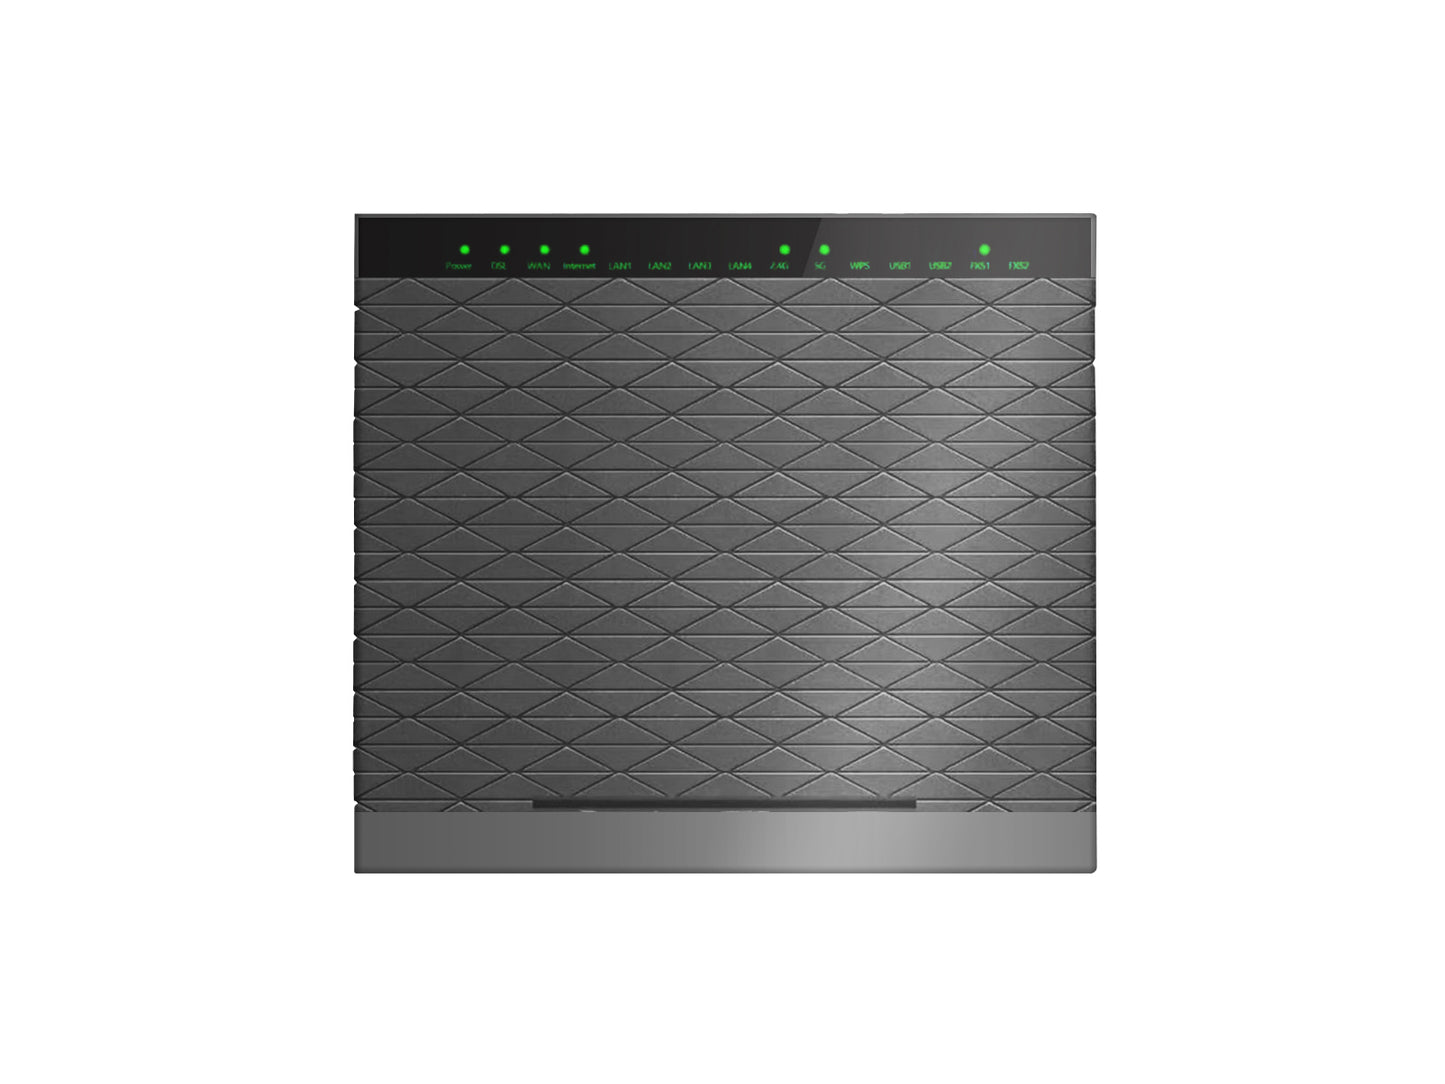 BDI AC Dual Band VDSL2+ Modem Router with VoIP